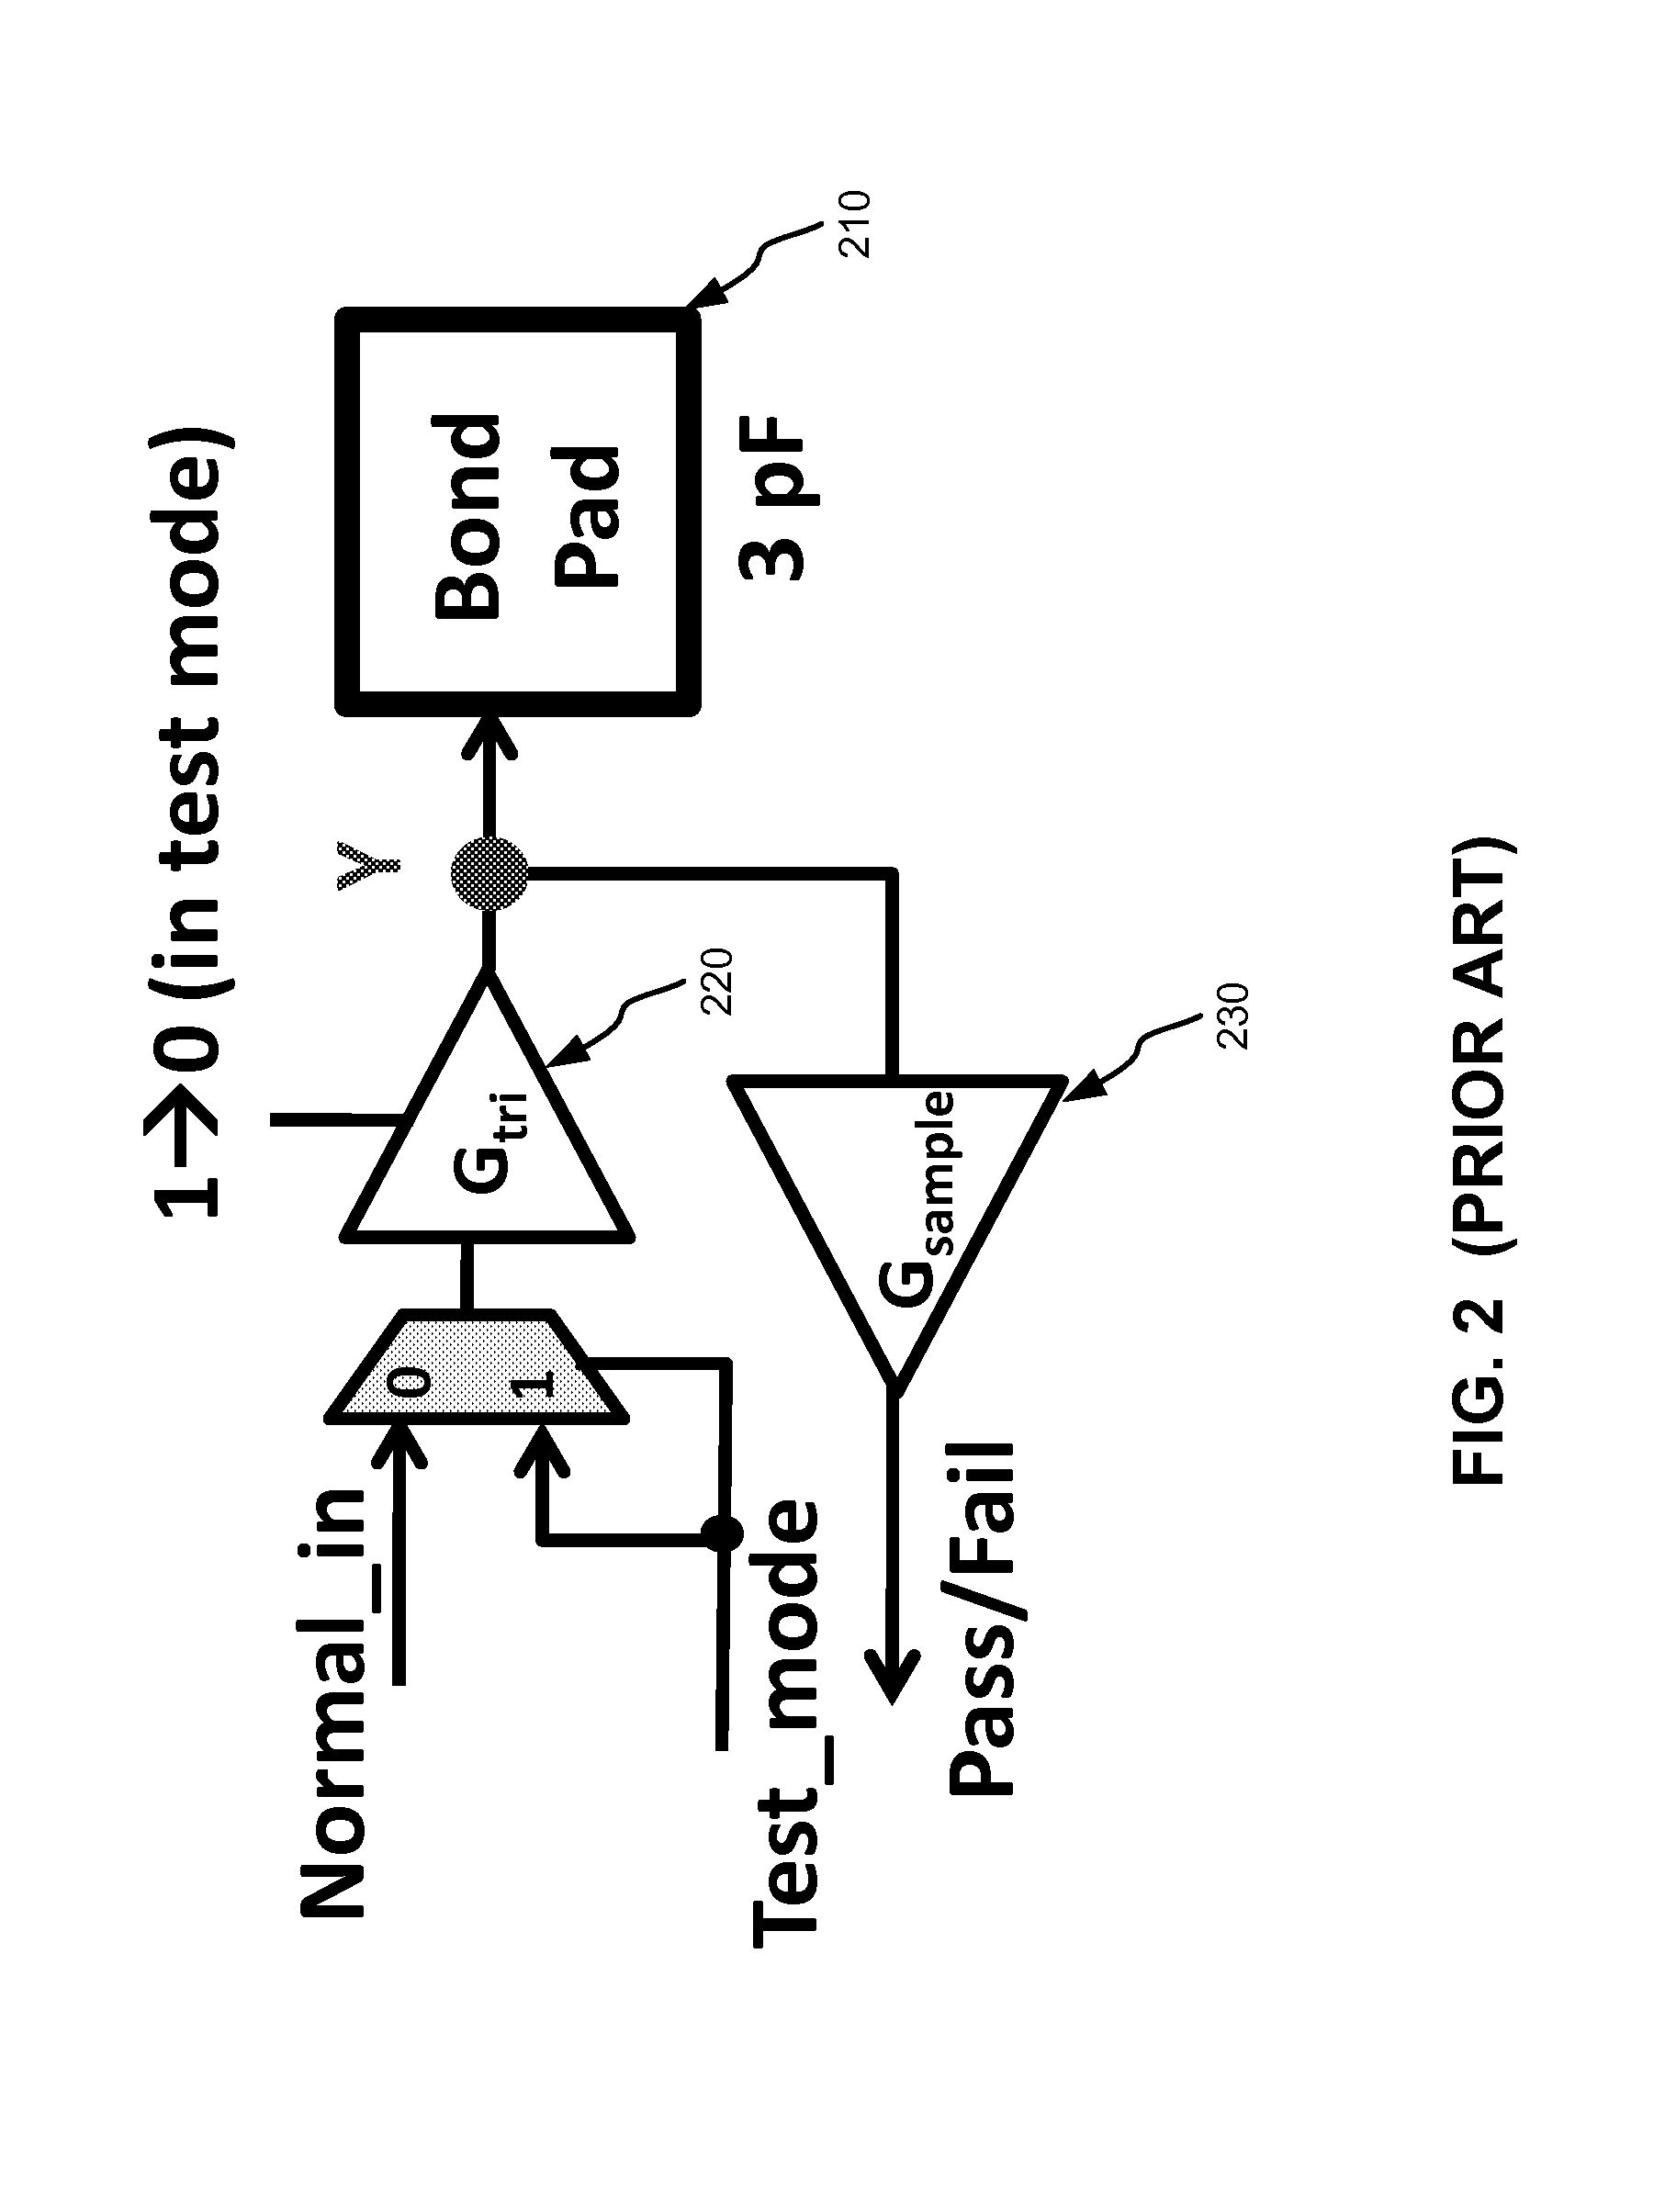 Programmable Leakage Test For Interconnects In Stacked Designs